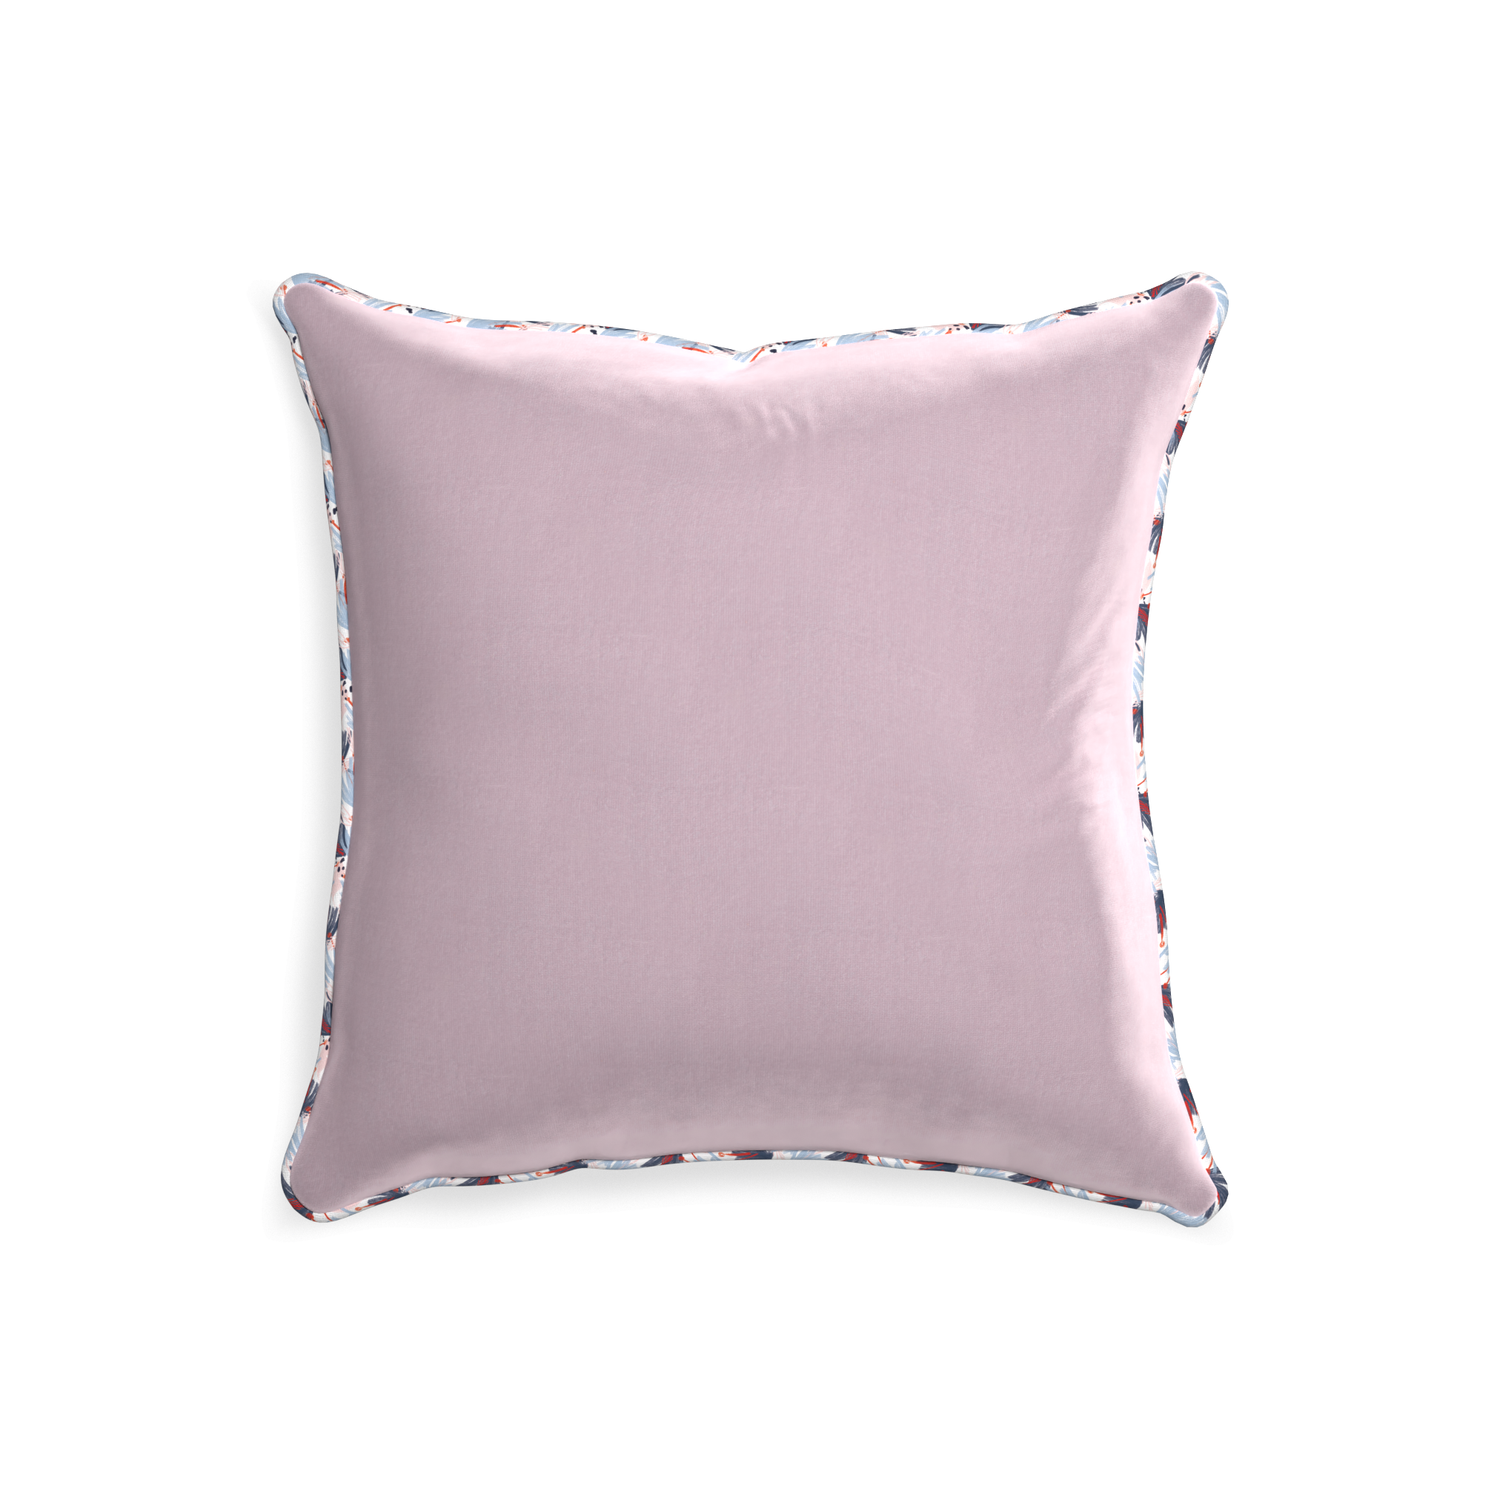 20-square lilac velvet custom pillow with e piping on white background